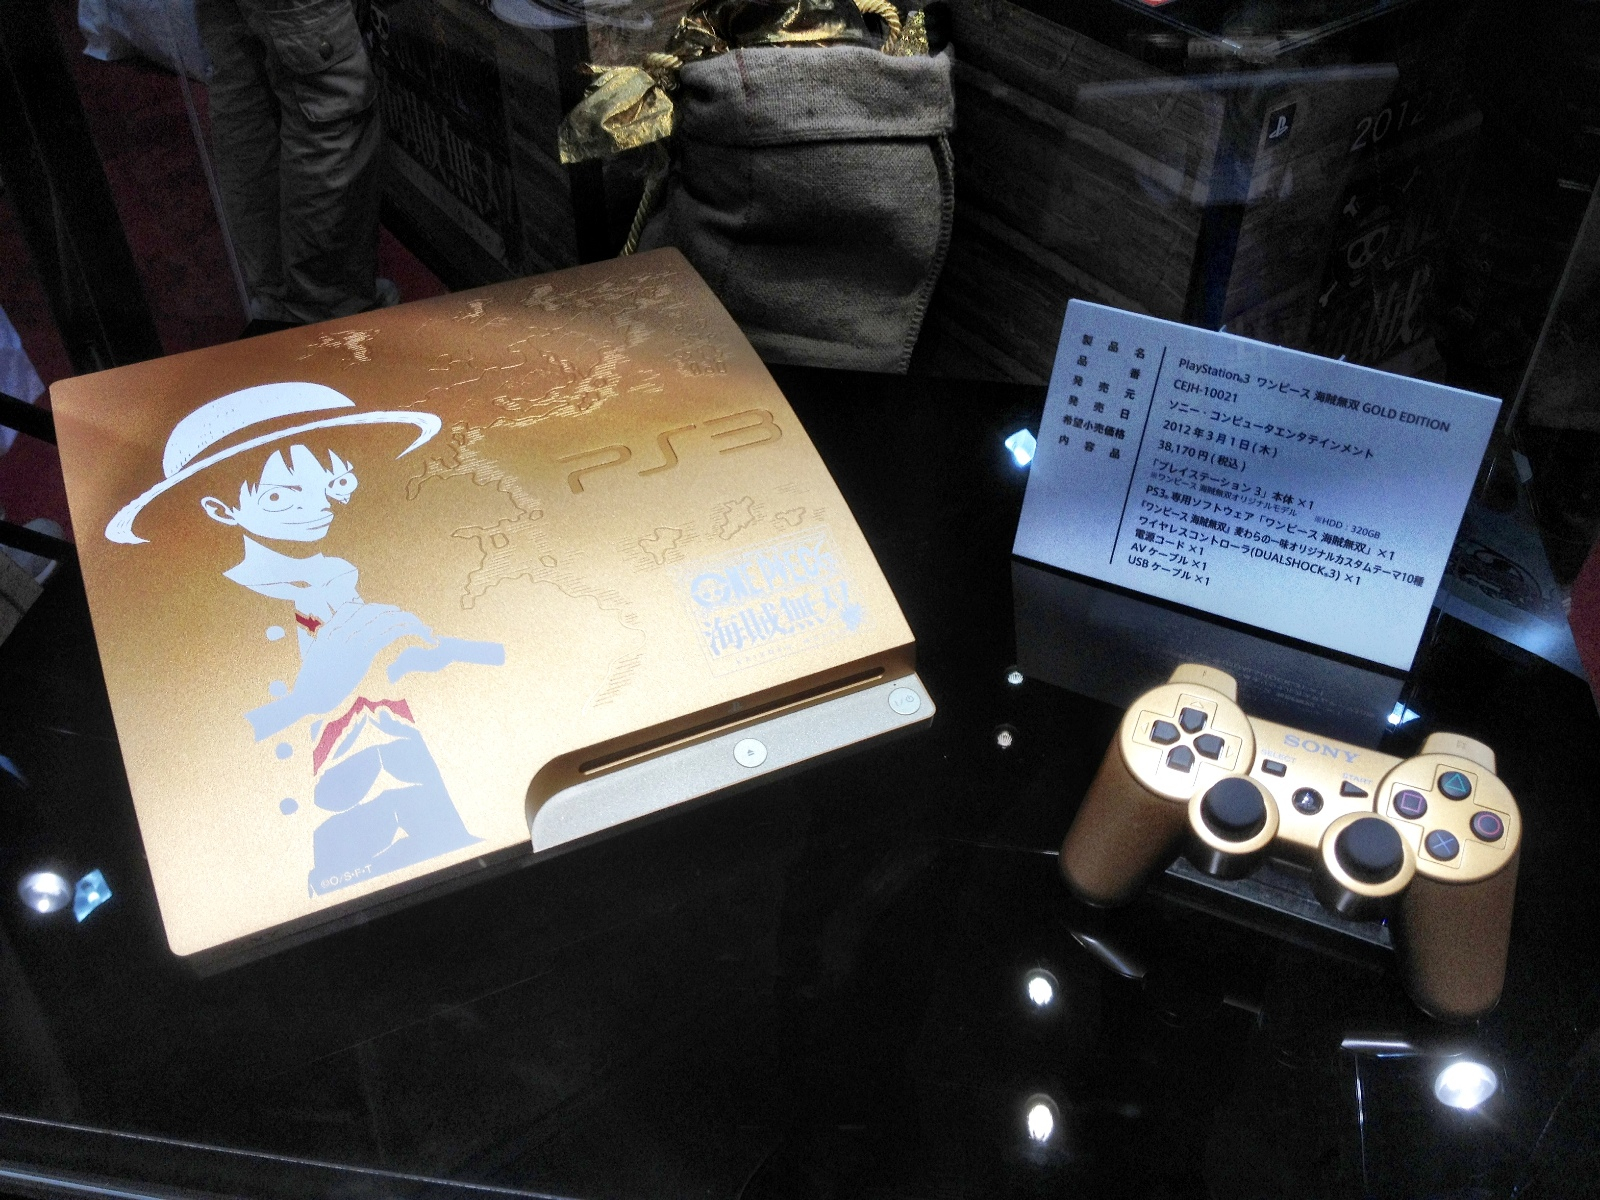 One Piece Pirate Musou Gold Edition PS3 seen at Jump Festa